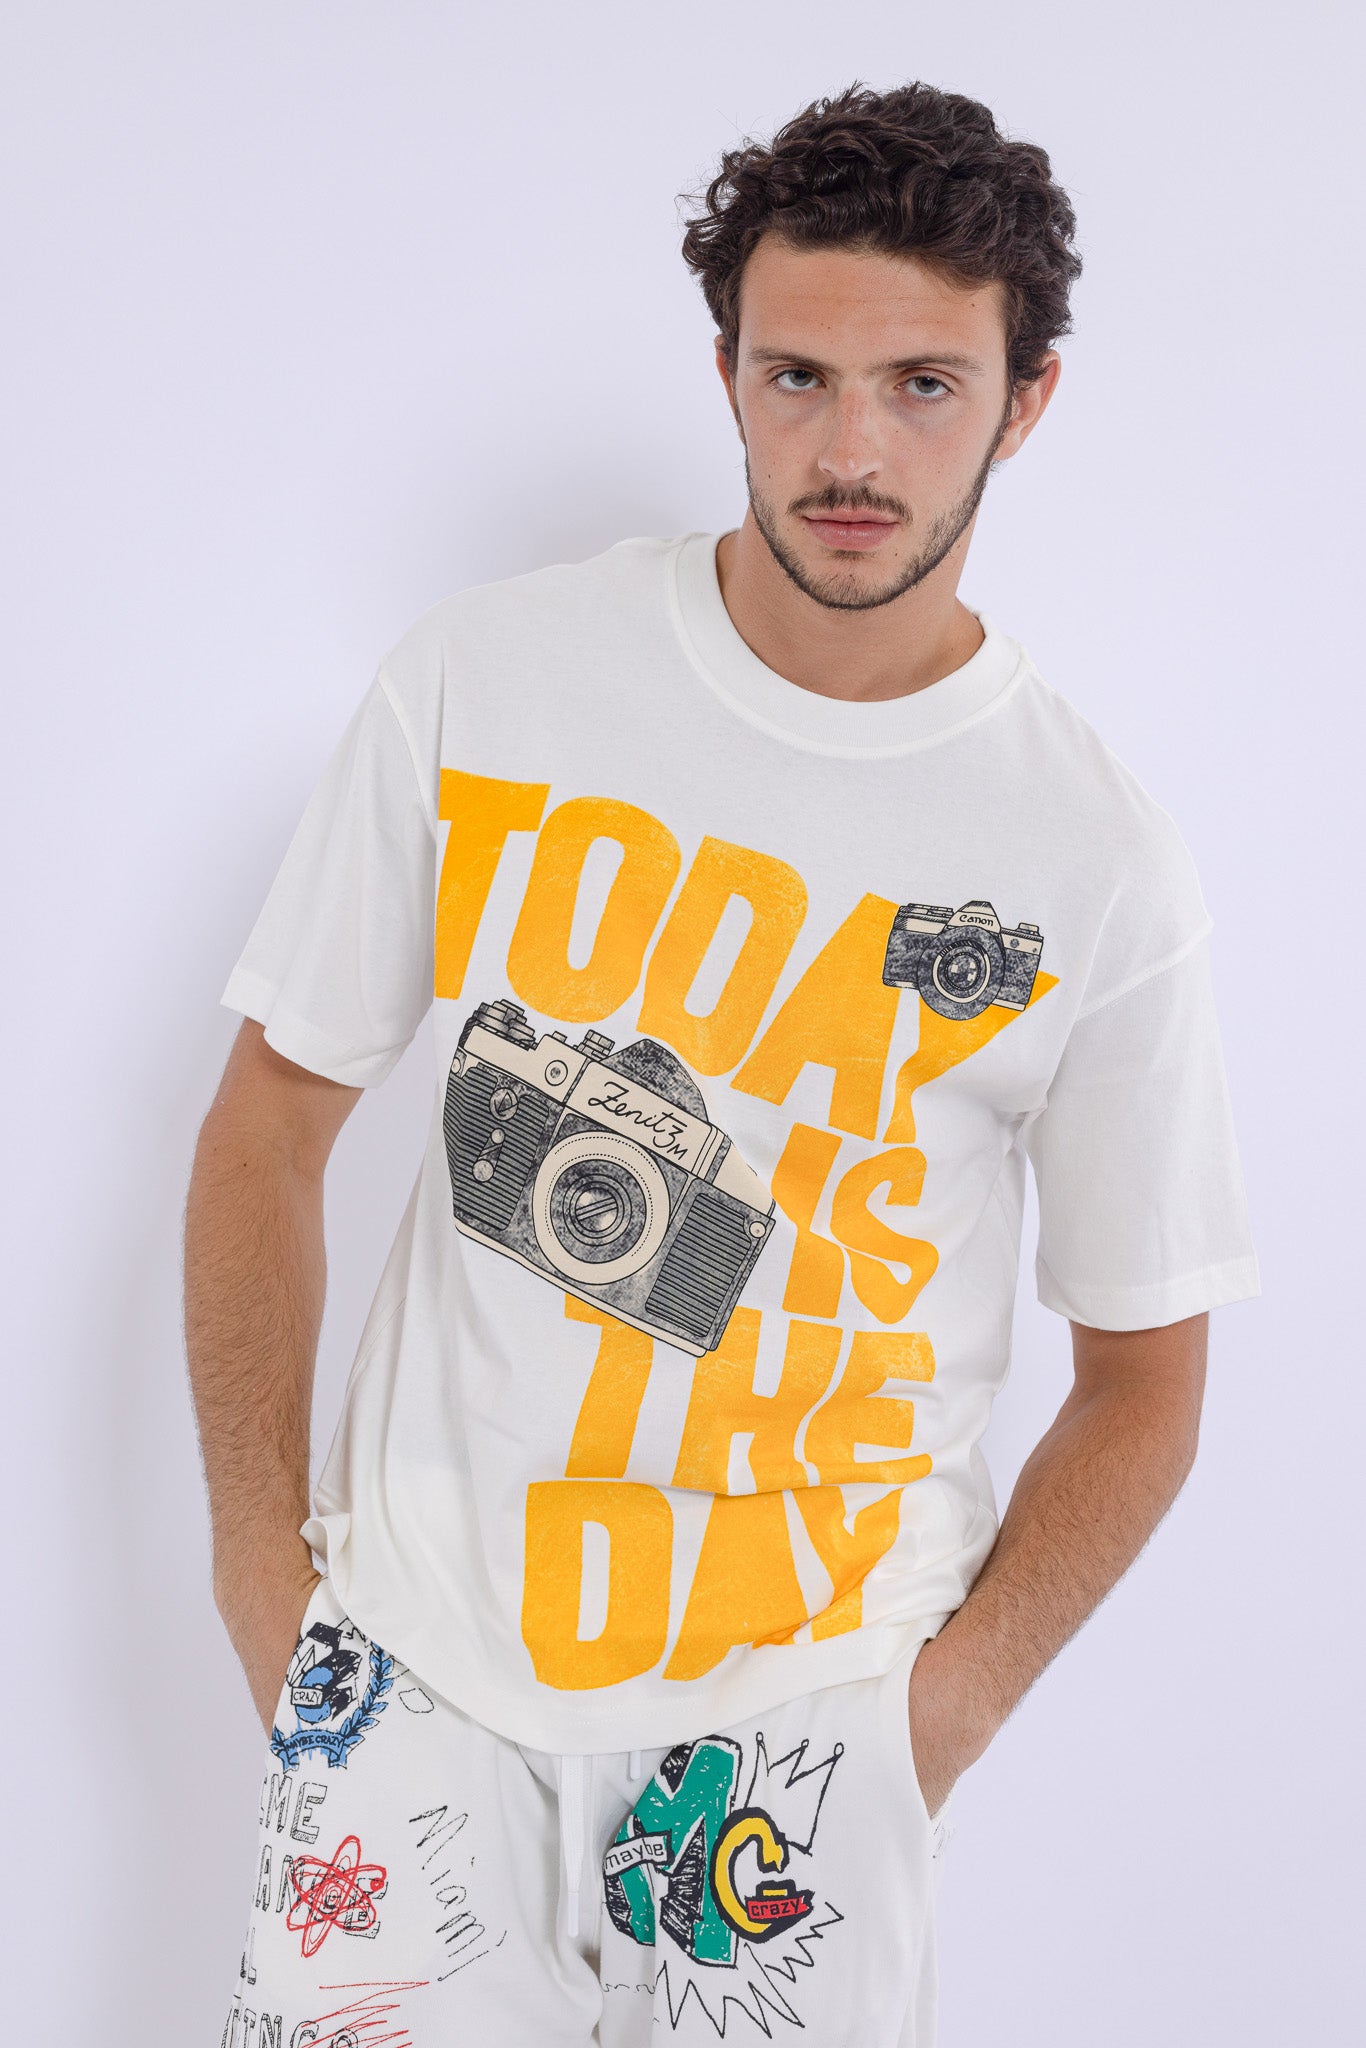 Today is the Day T-shirt